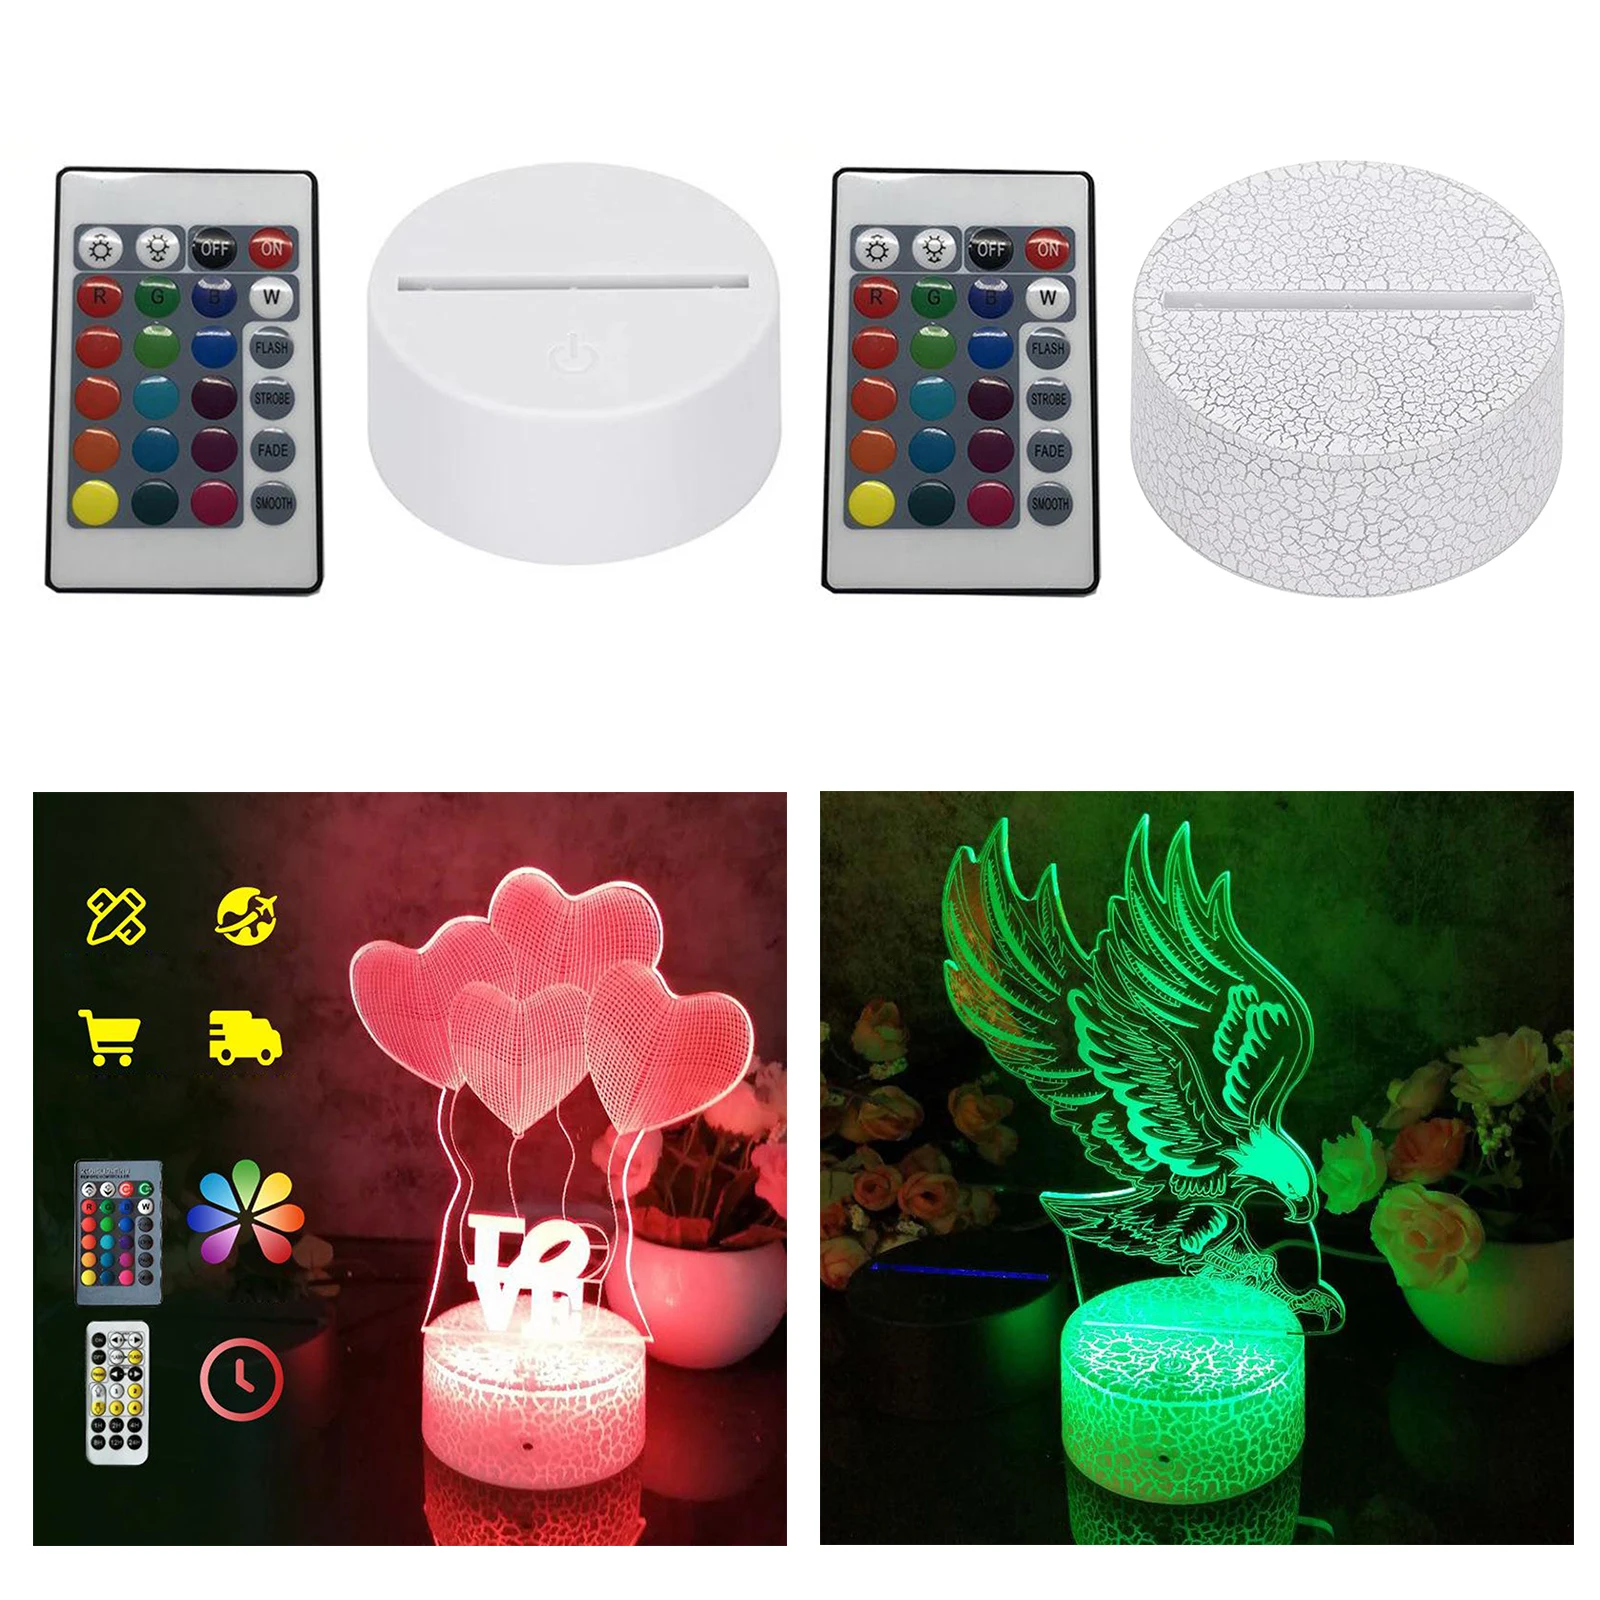 3D Night LED Light Replacement Base Bedroom Child Room Decoration Lights Nightlight Display Stand Color Changing Lamp Holder